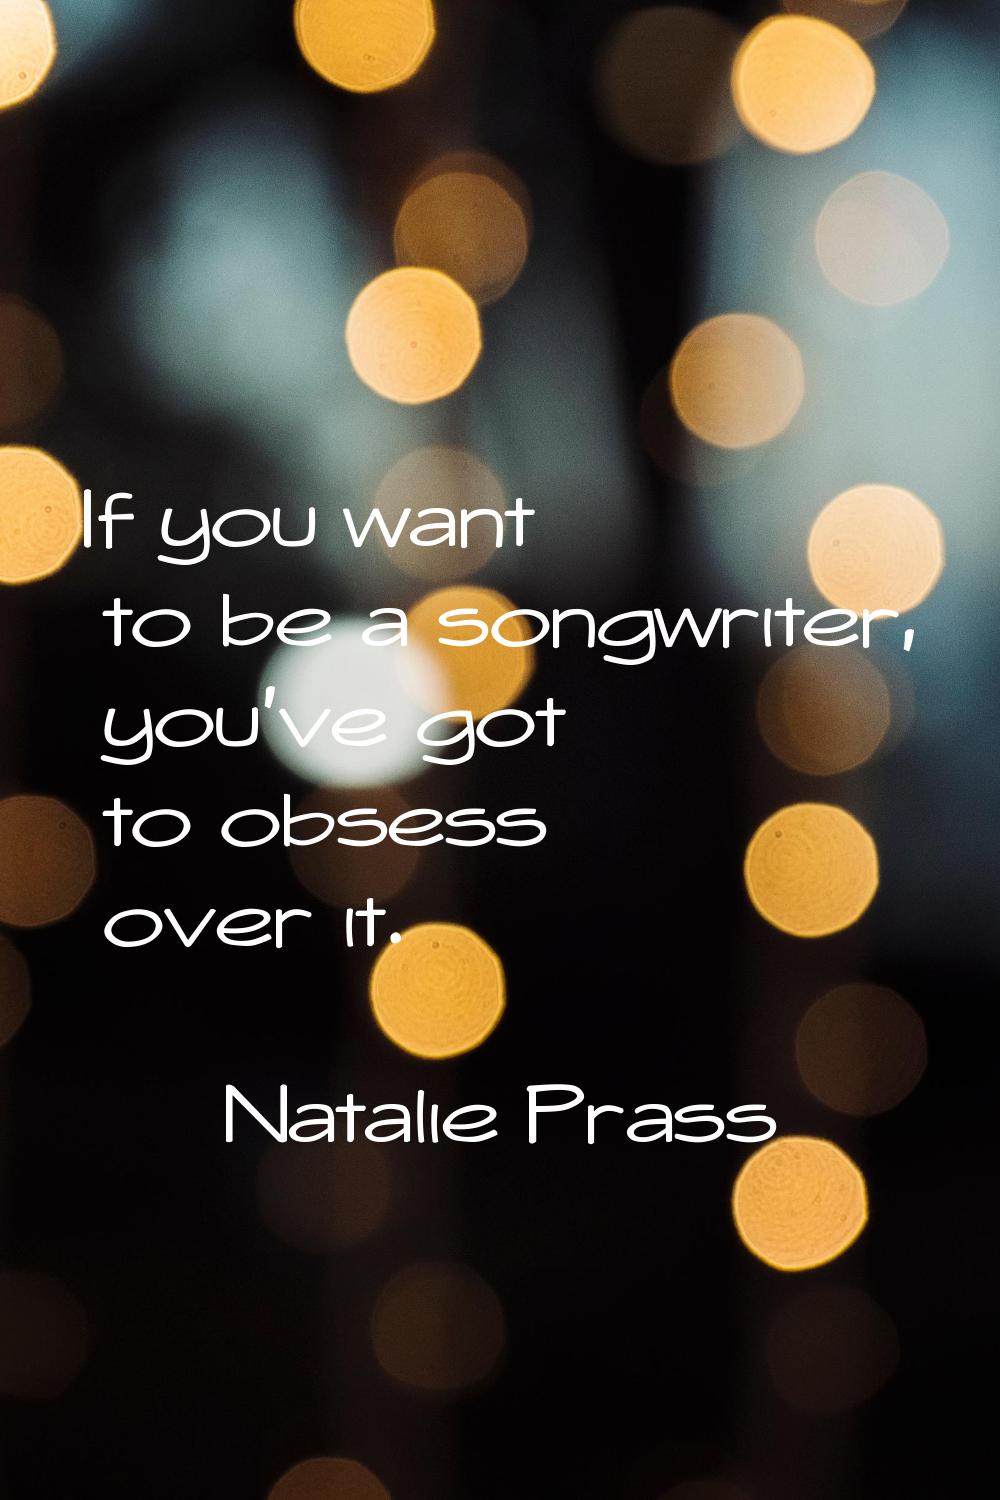 If you want to be a songwriter, you've got to obsess over it.